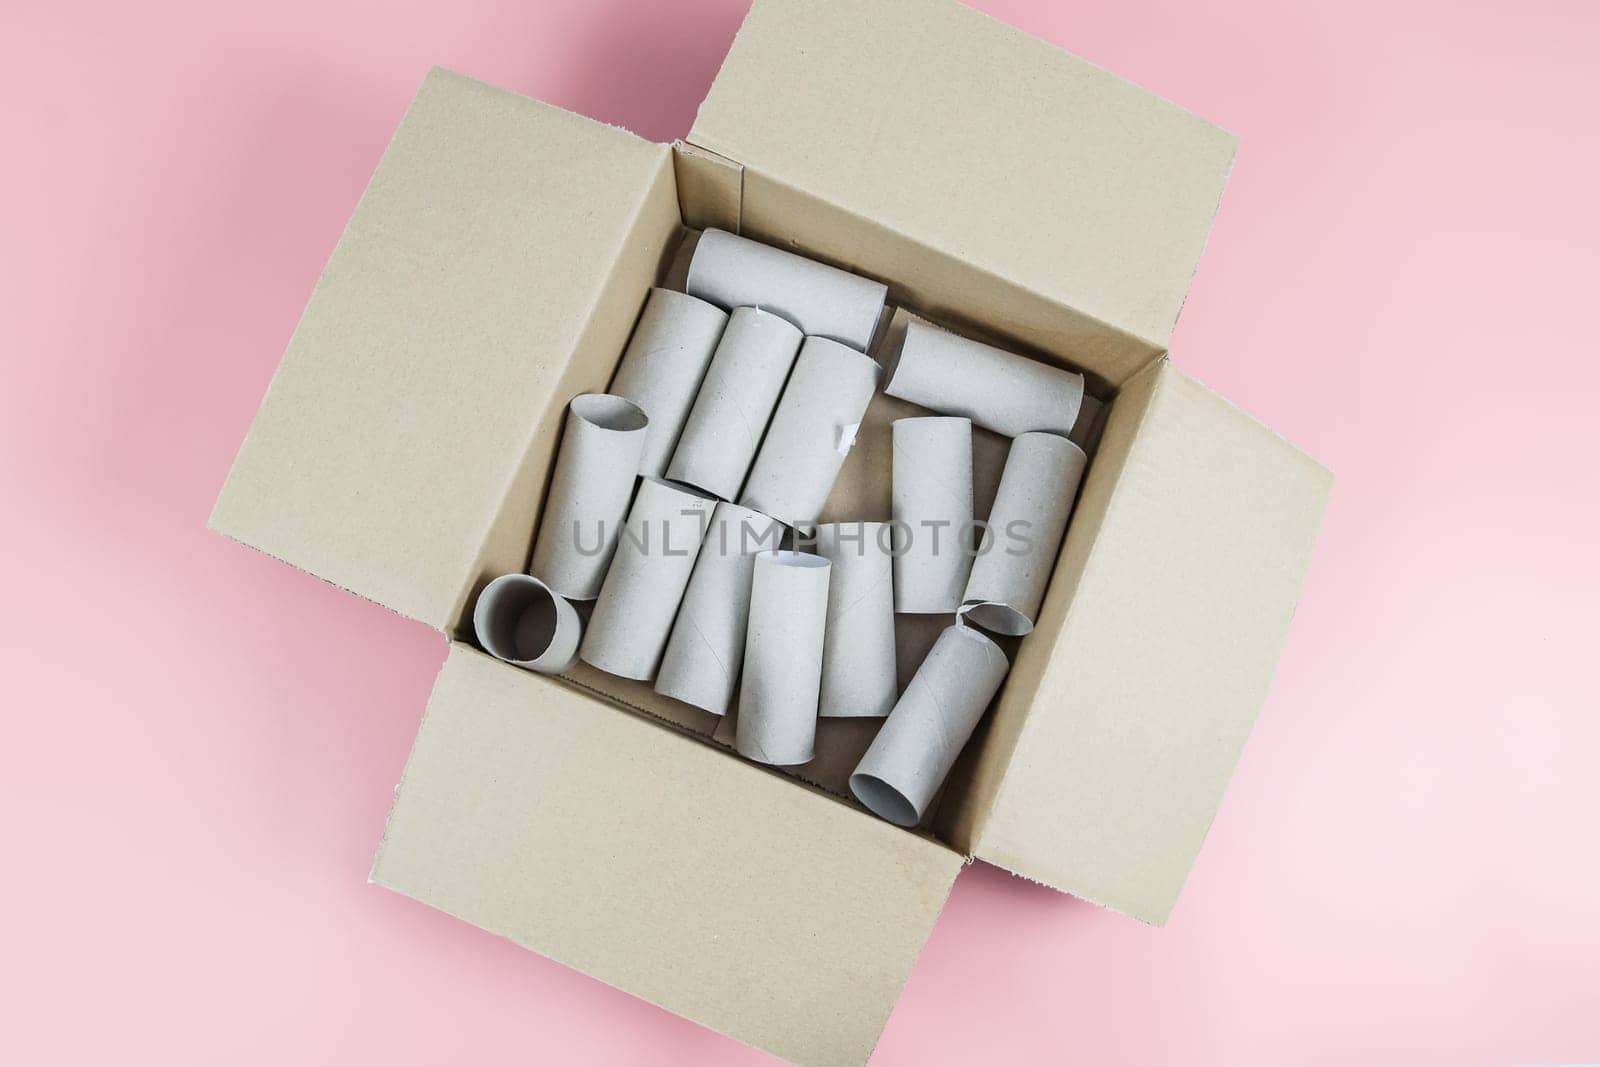 Empty toilet paper rolls lie in a cardboard box on a pastel pink background close-up, flat lay closeup. The concept is environmentally friendly, waste sorting and recycling.